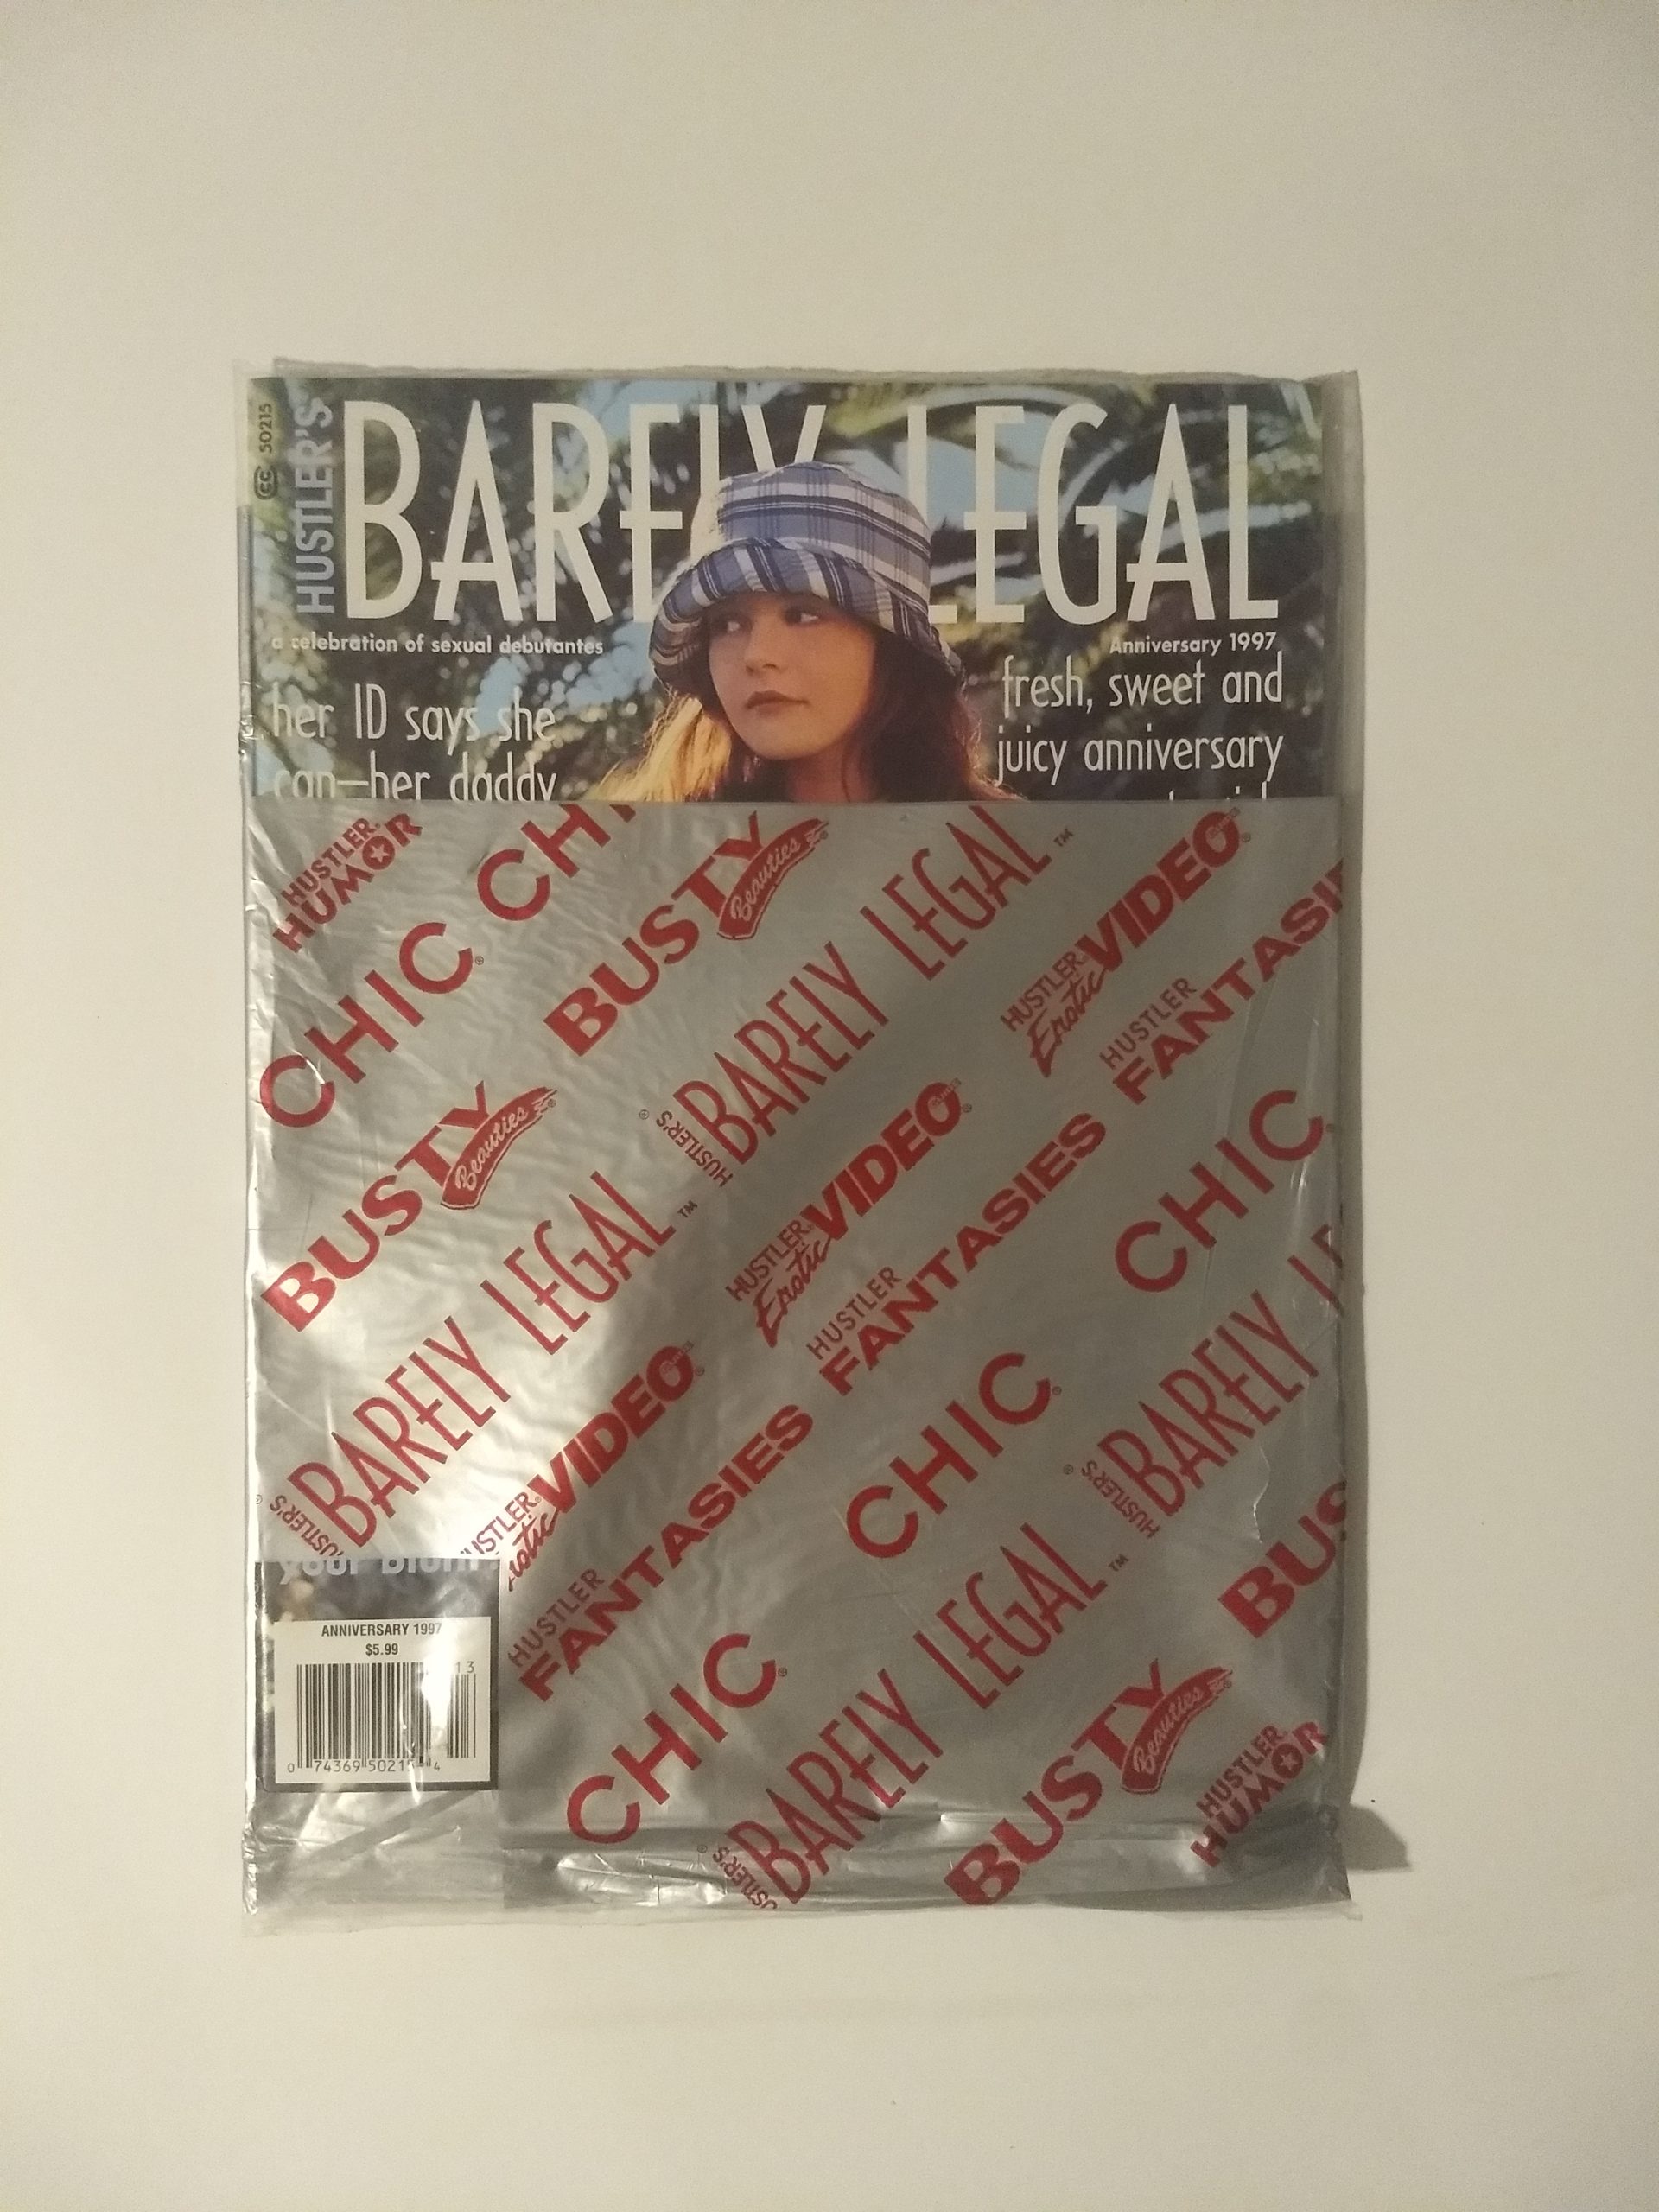 Barely Legal Anniversary 1997 – Warehouse Books